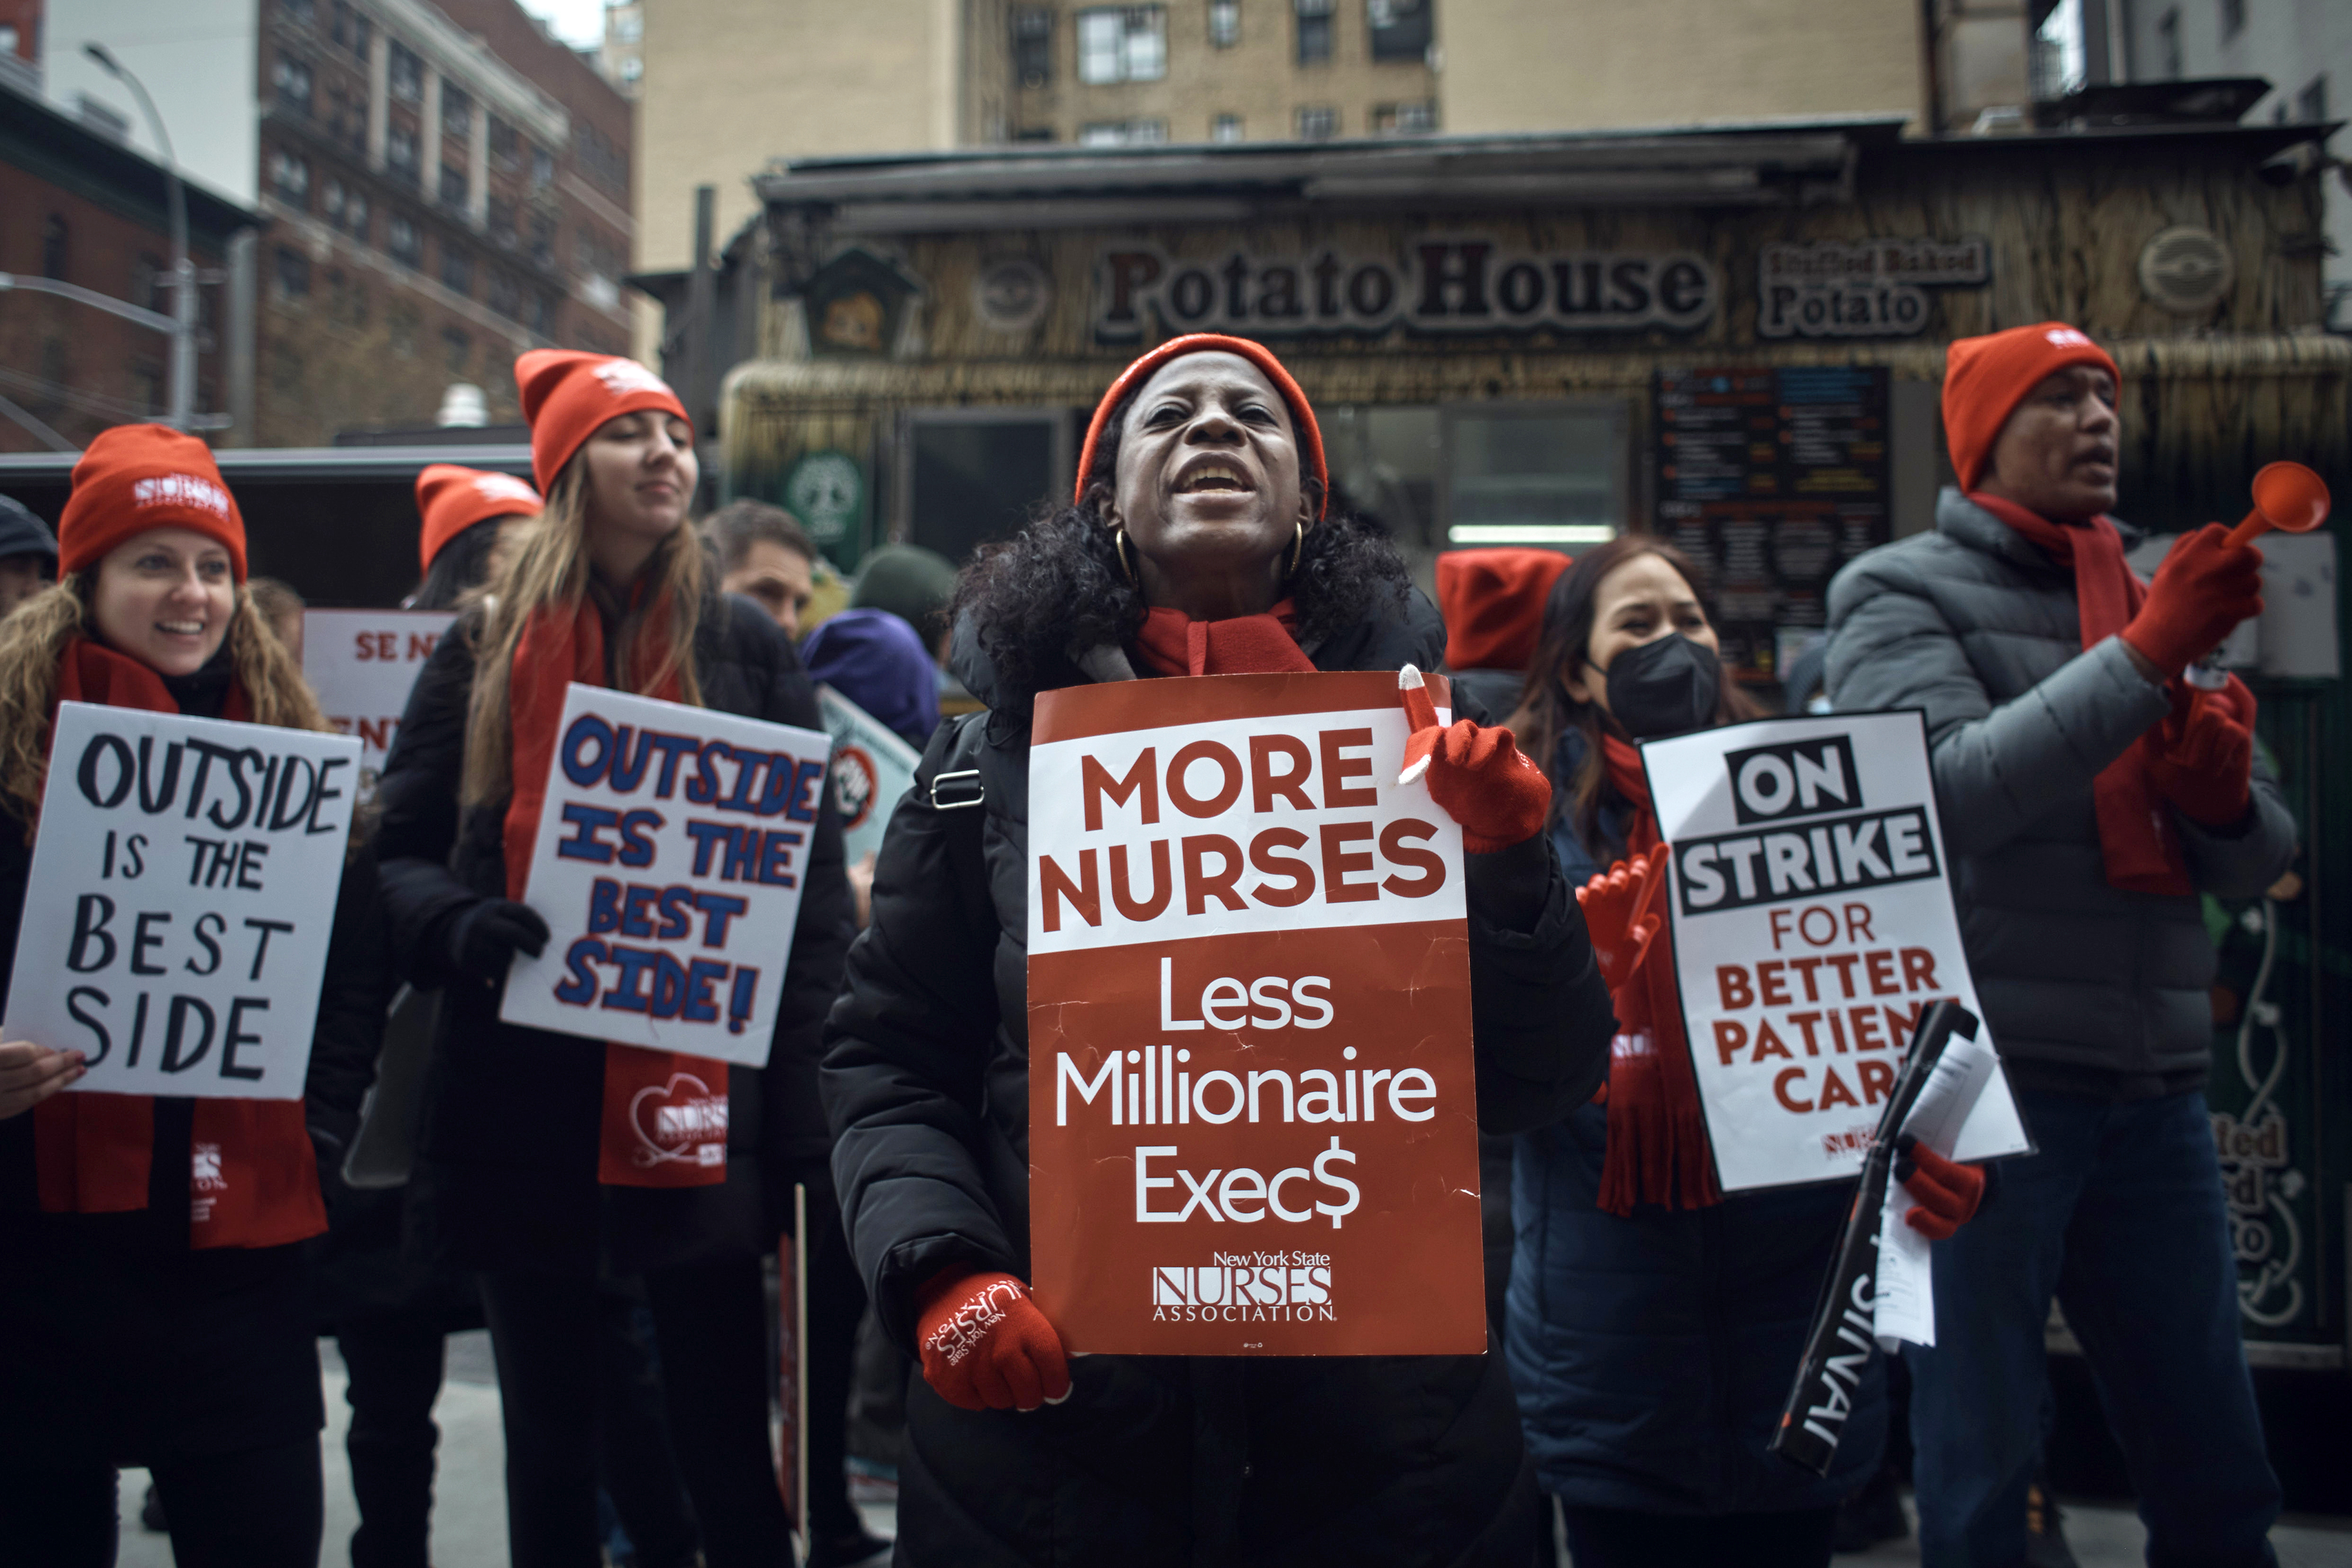 Protesters outside a hospital hold signs that read, “More nurses, less millionaire execs,” “Outside is the best side,” and, “On strike for better patient care.”